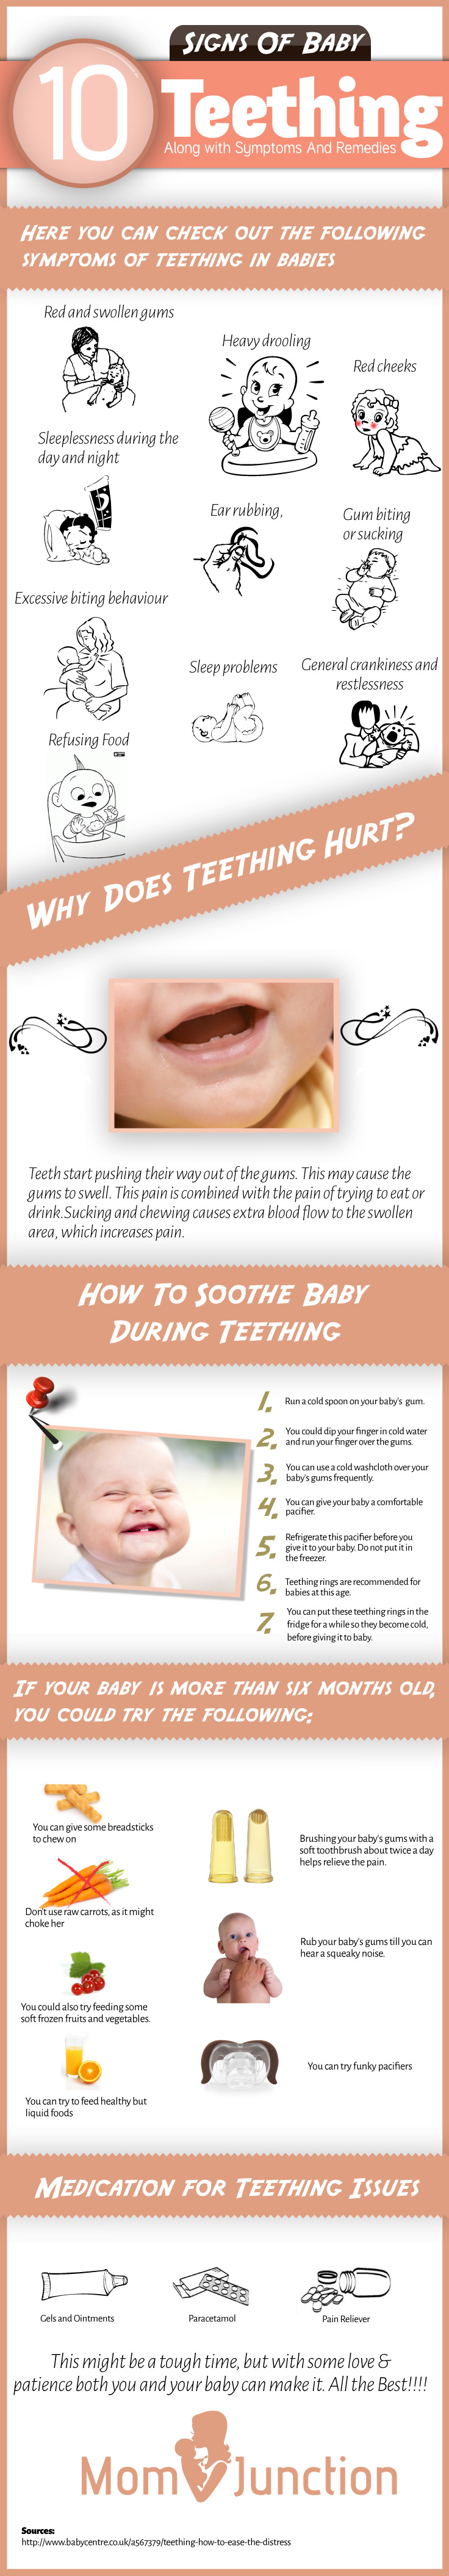 13 Signs Of Baby Teething Along With Remedies